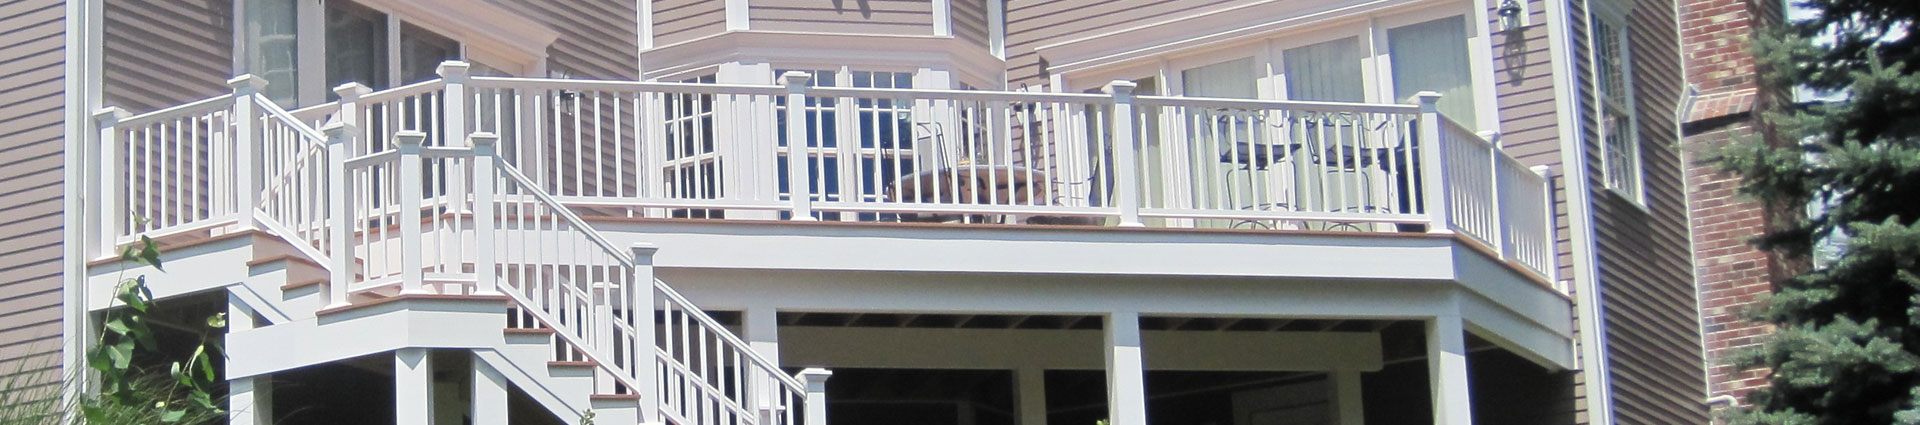 Deck Stairs Showing Contracting Remodeling Process